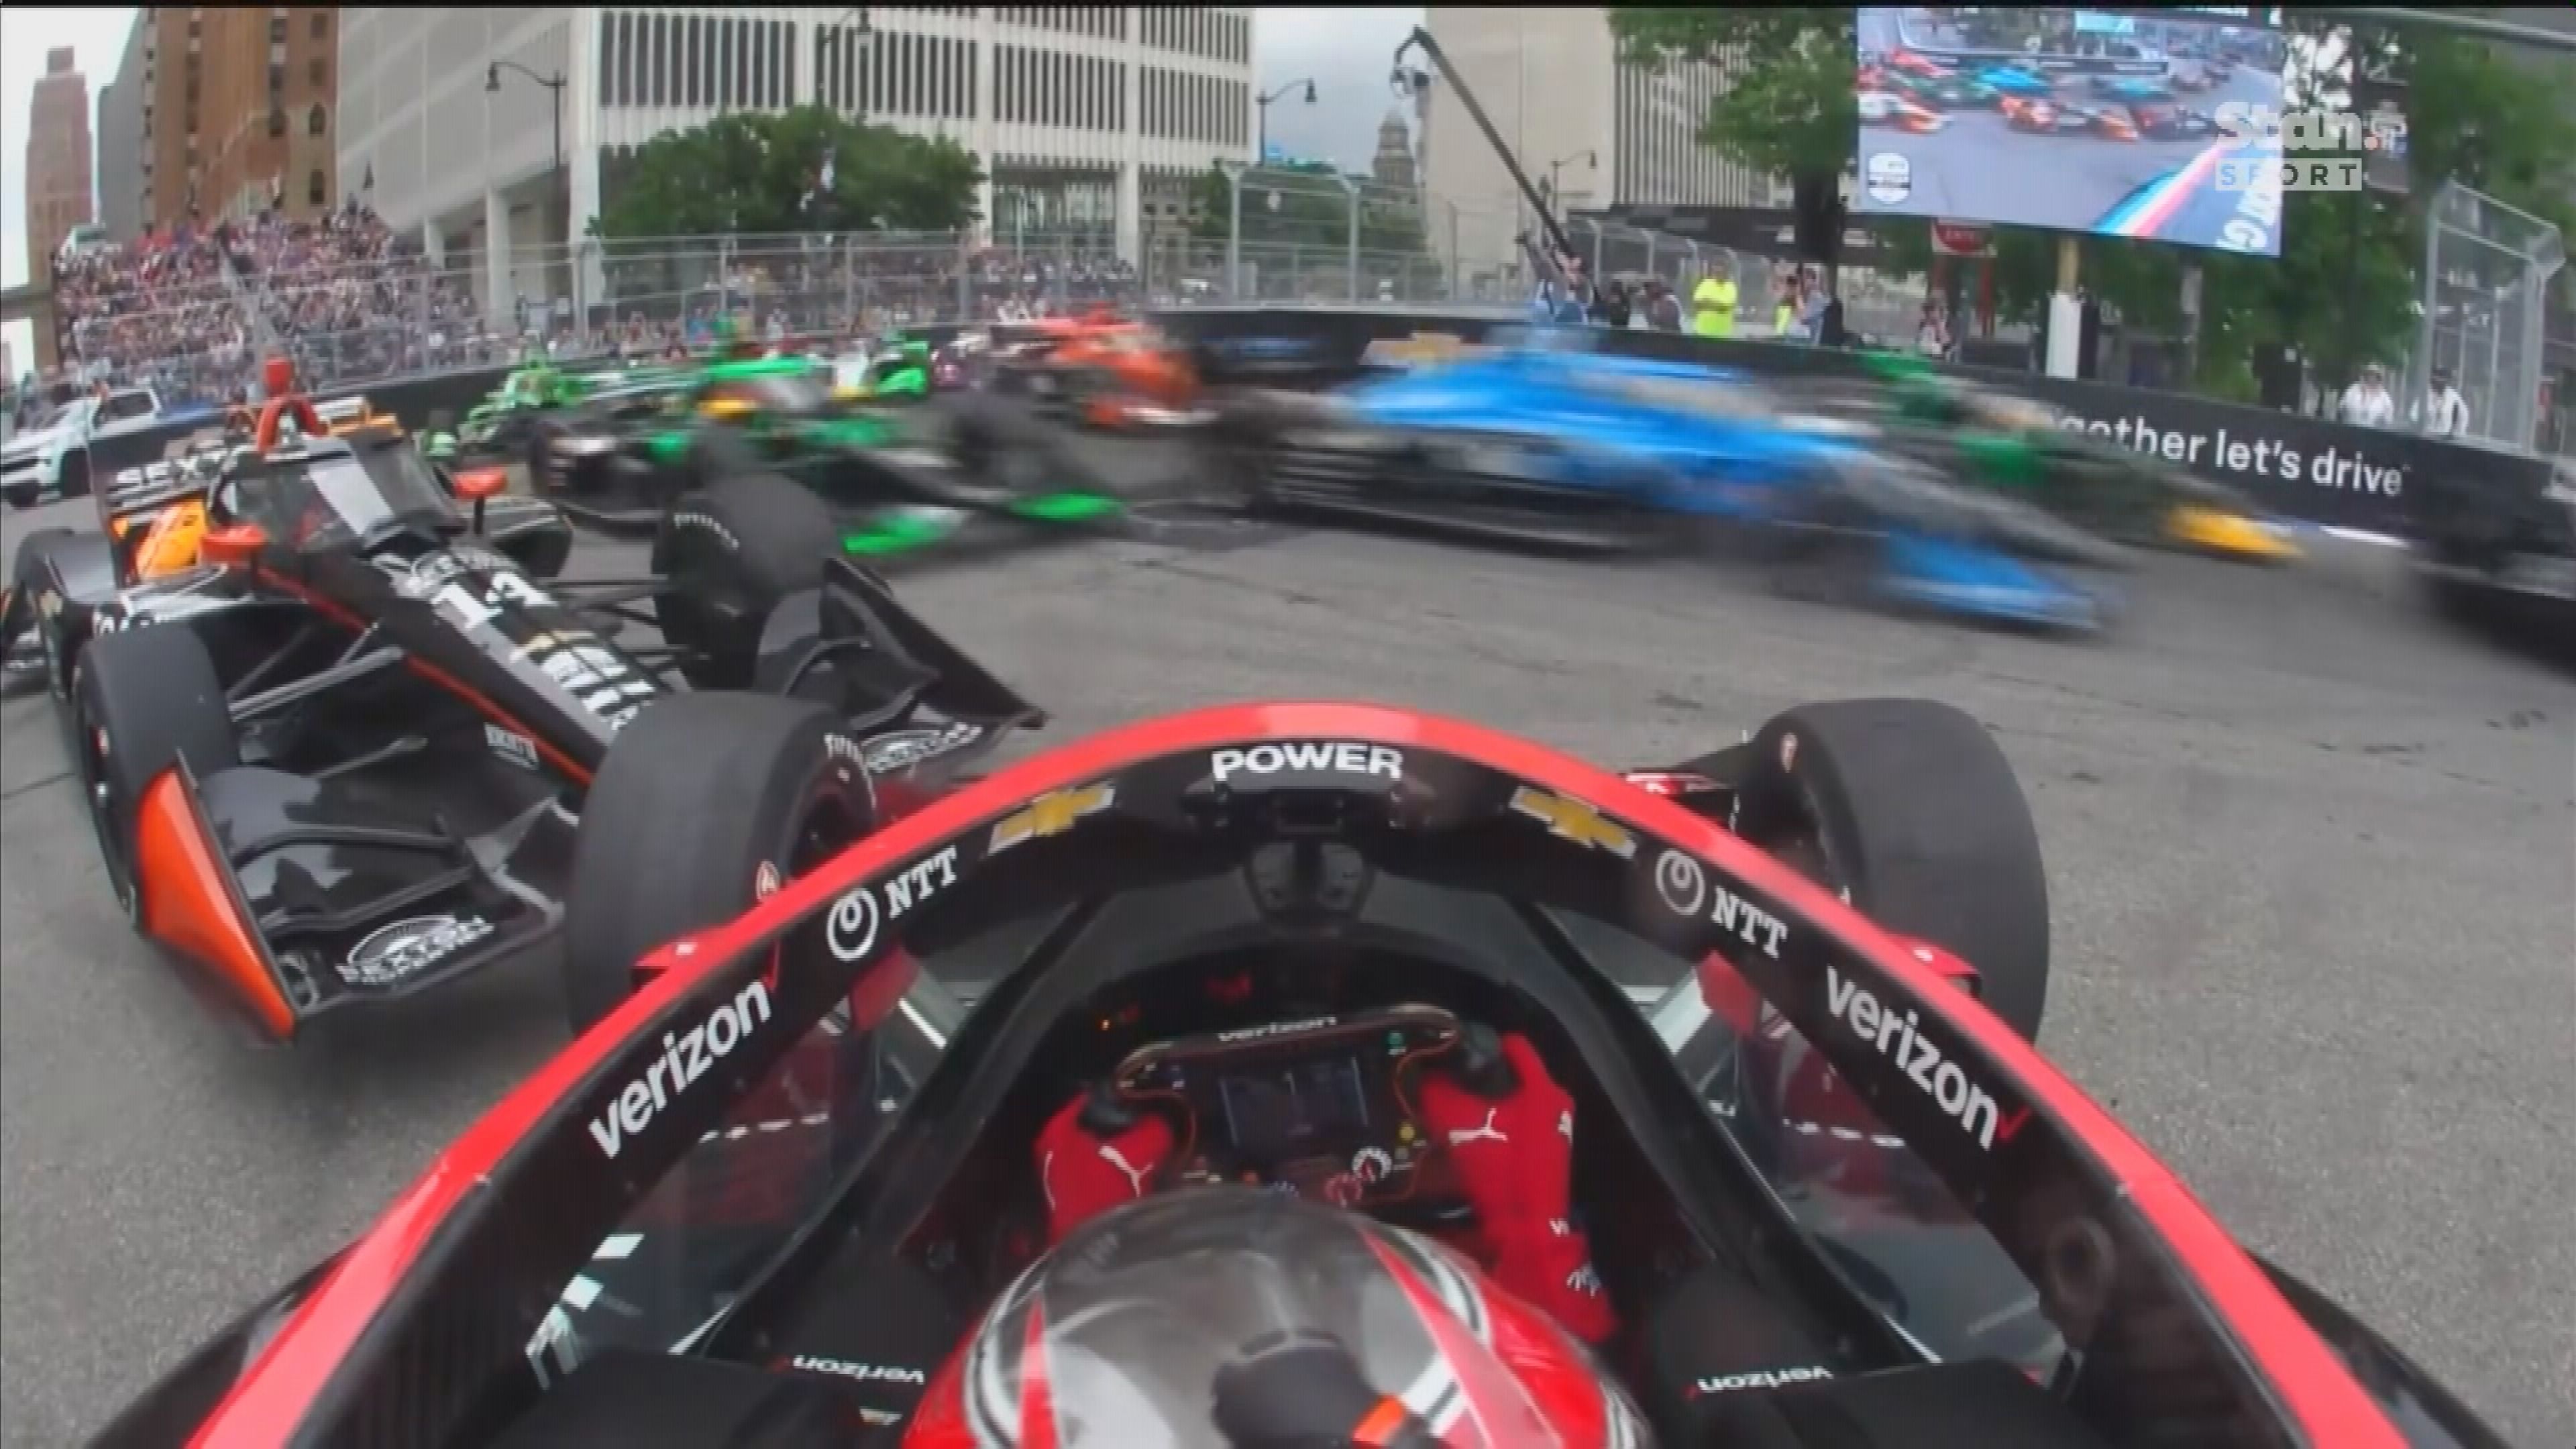 Will Power was left stranded blocking the track after being spun on the opening lap of the Detroit IndyCar Grand Prix.